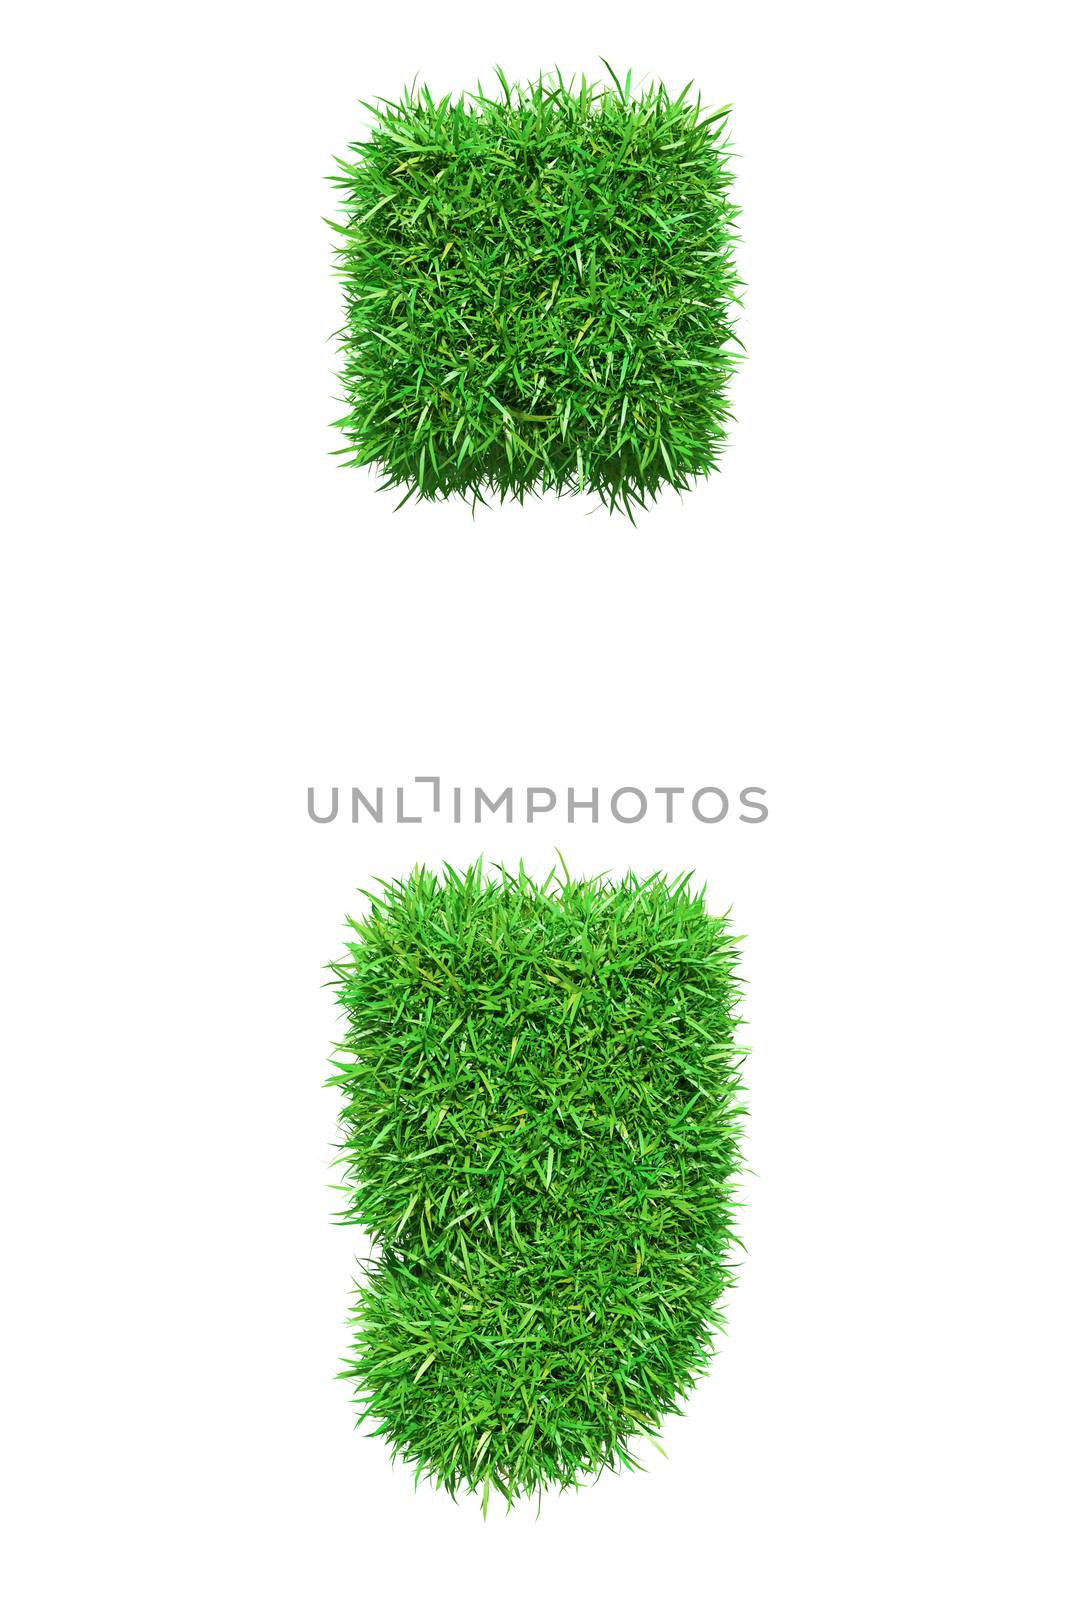 Green grass semicolon, isolated on white background. 3D illustration